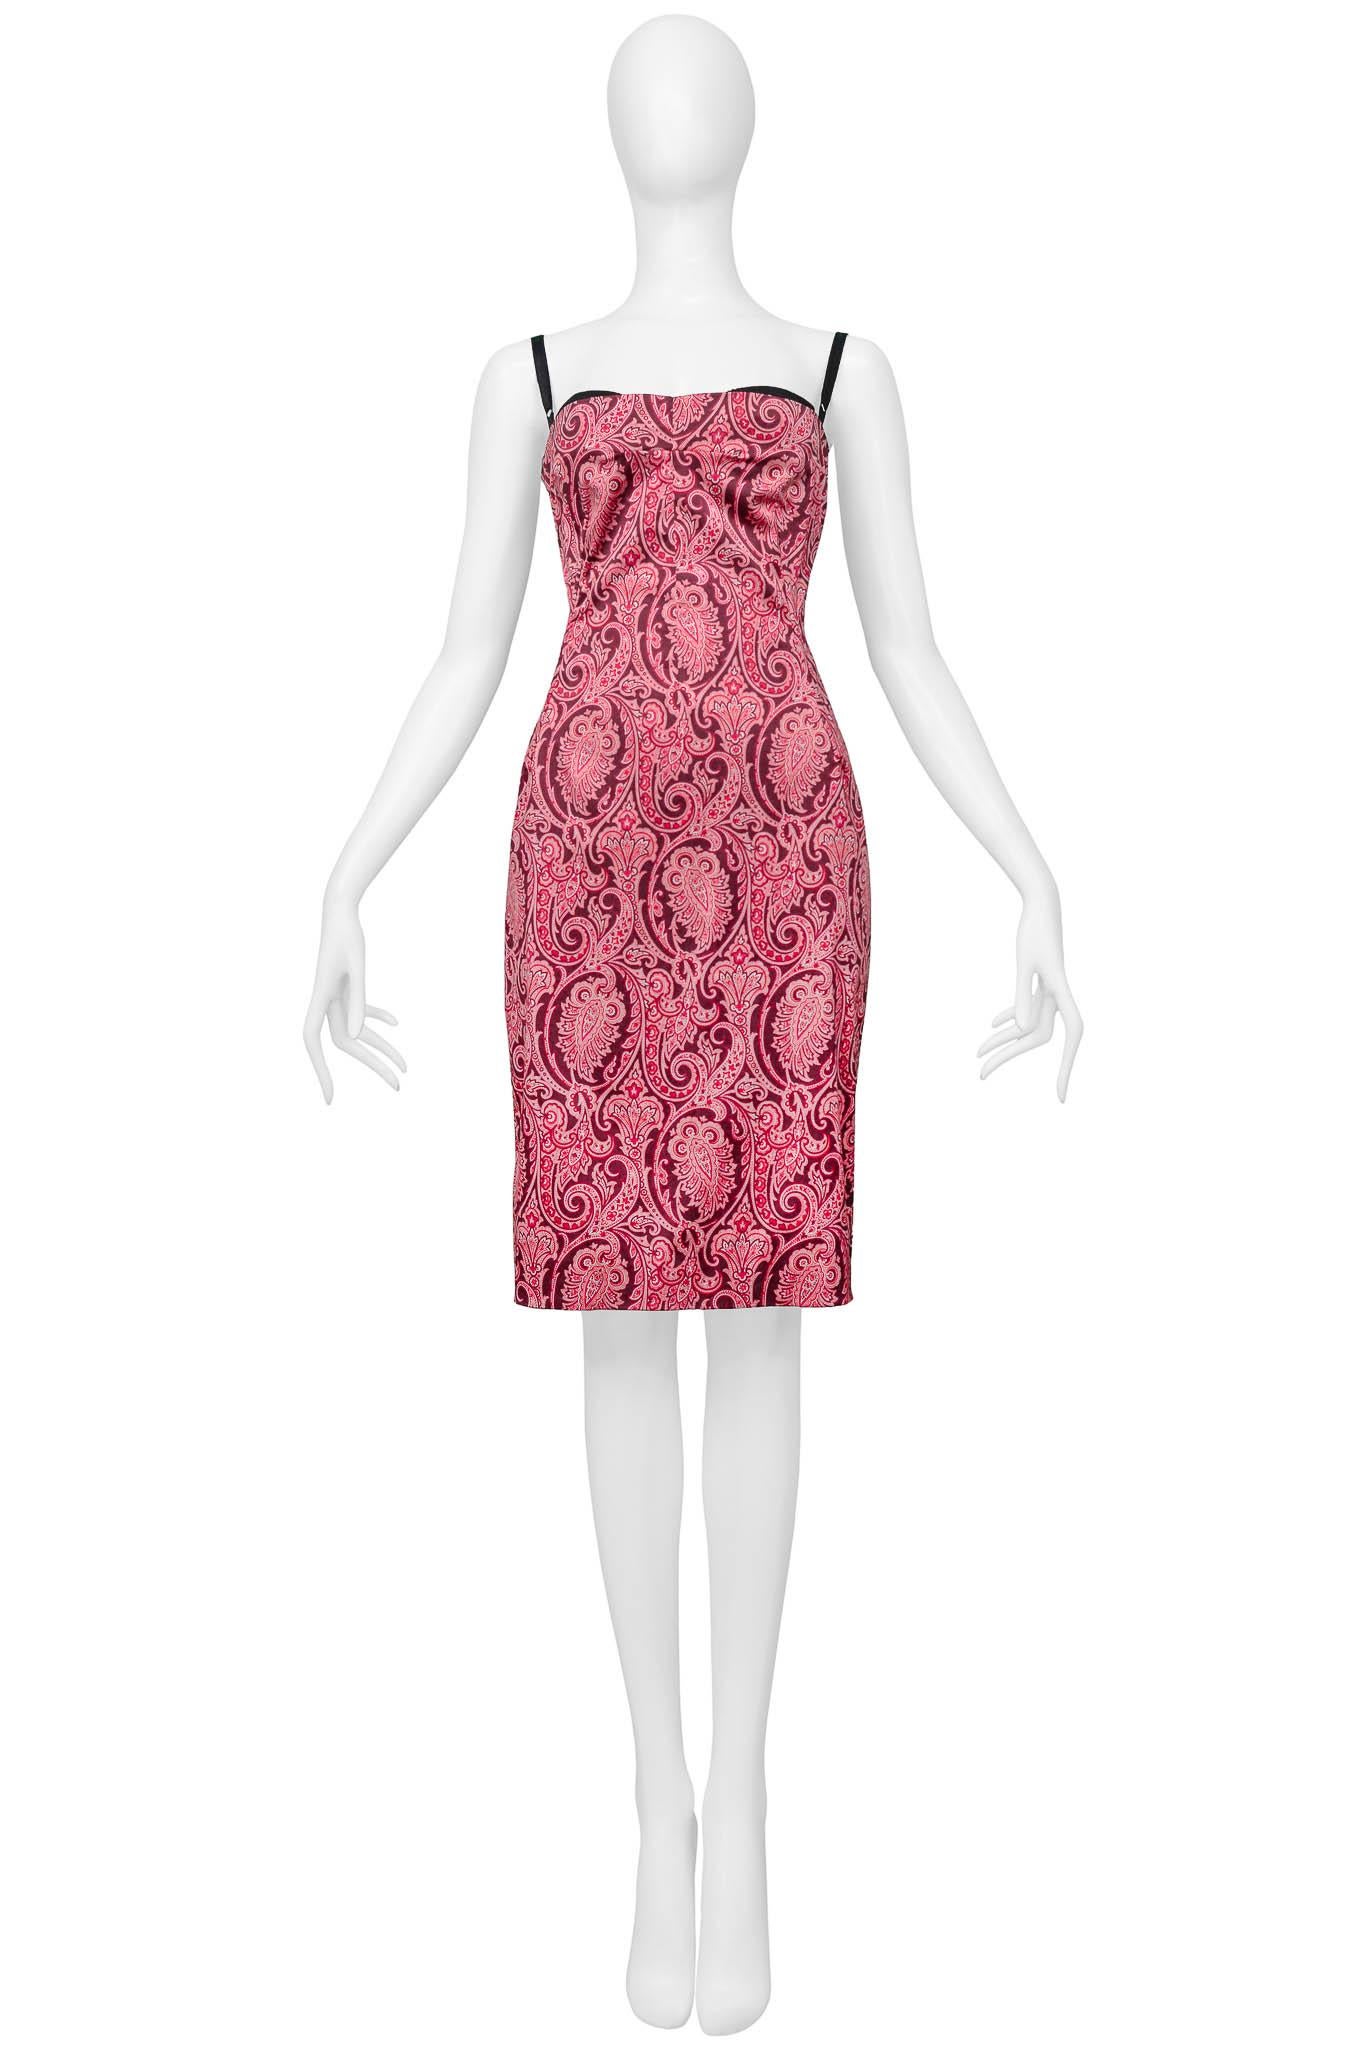 Resurrection Vintage is excited to offer a vintage Dolce & Gabbana pink dress featuring a paisley pattern, attached black bra, adjustable straps, and zipper at the back.

Dolce & Gabbana
Size 40
Silk, Nylon, & Elastane 
Excellent Vintage Condition